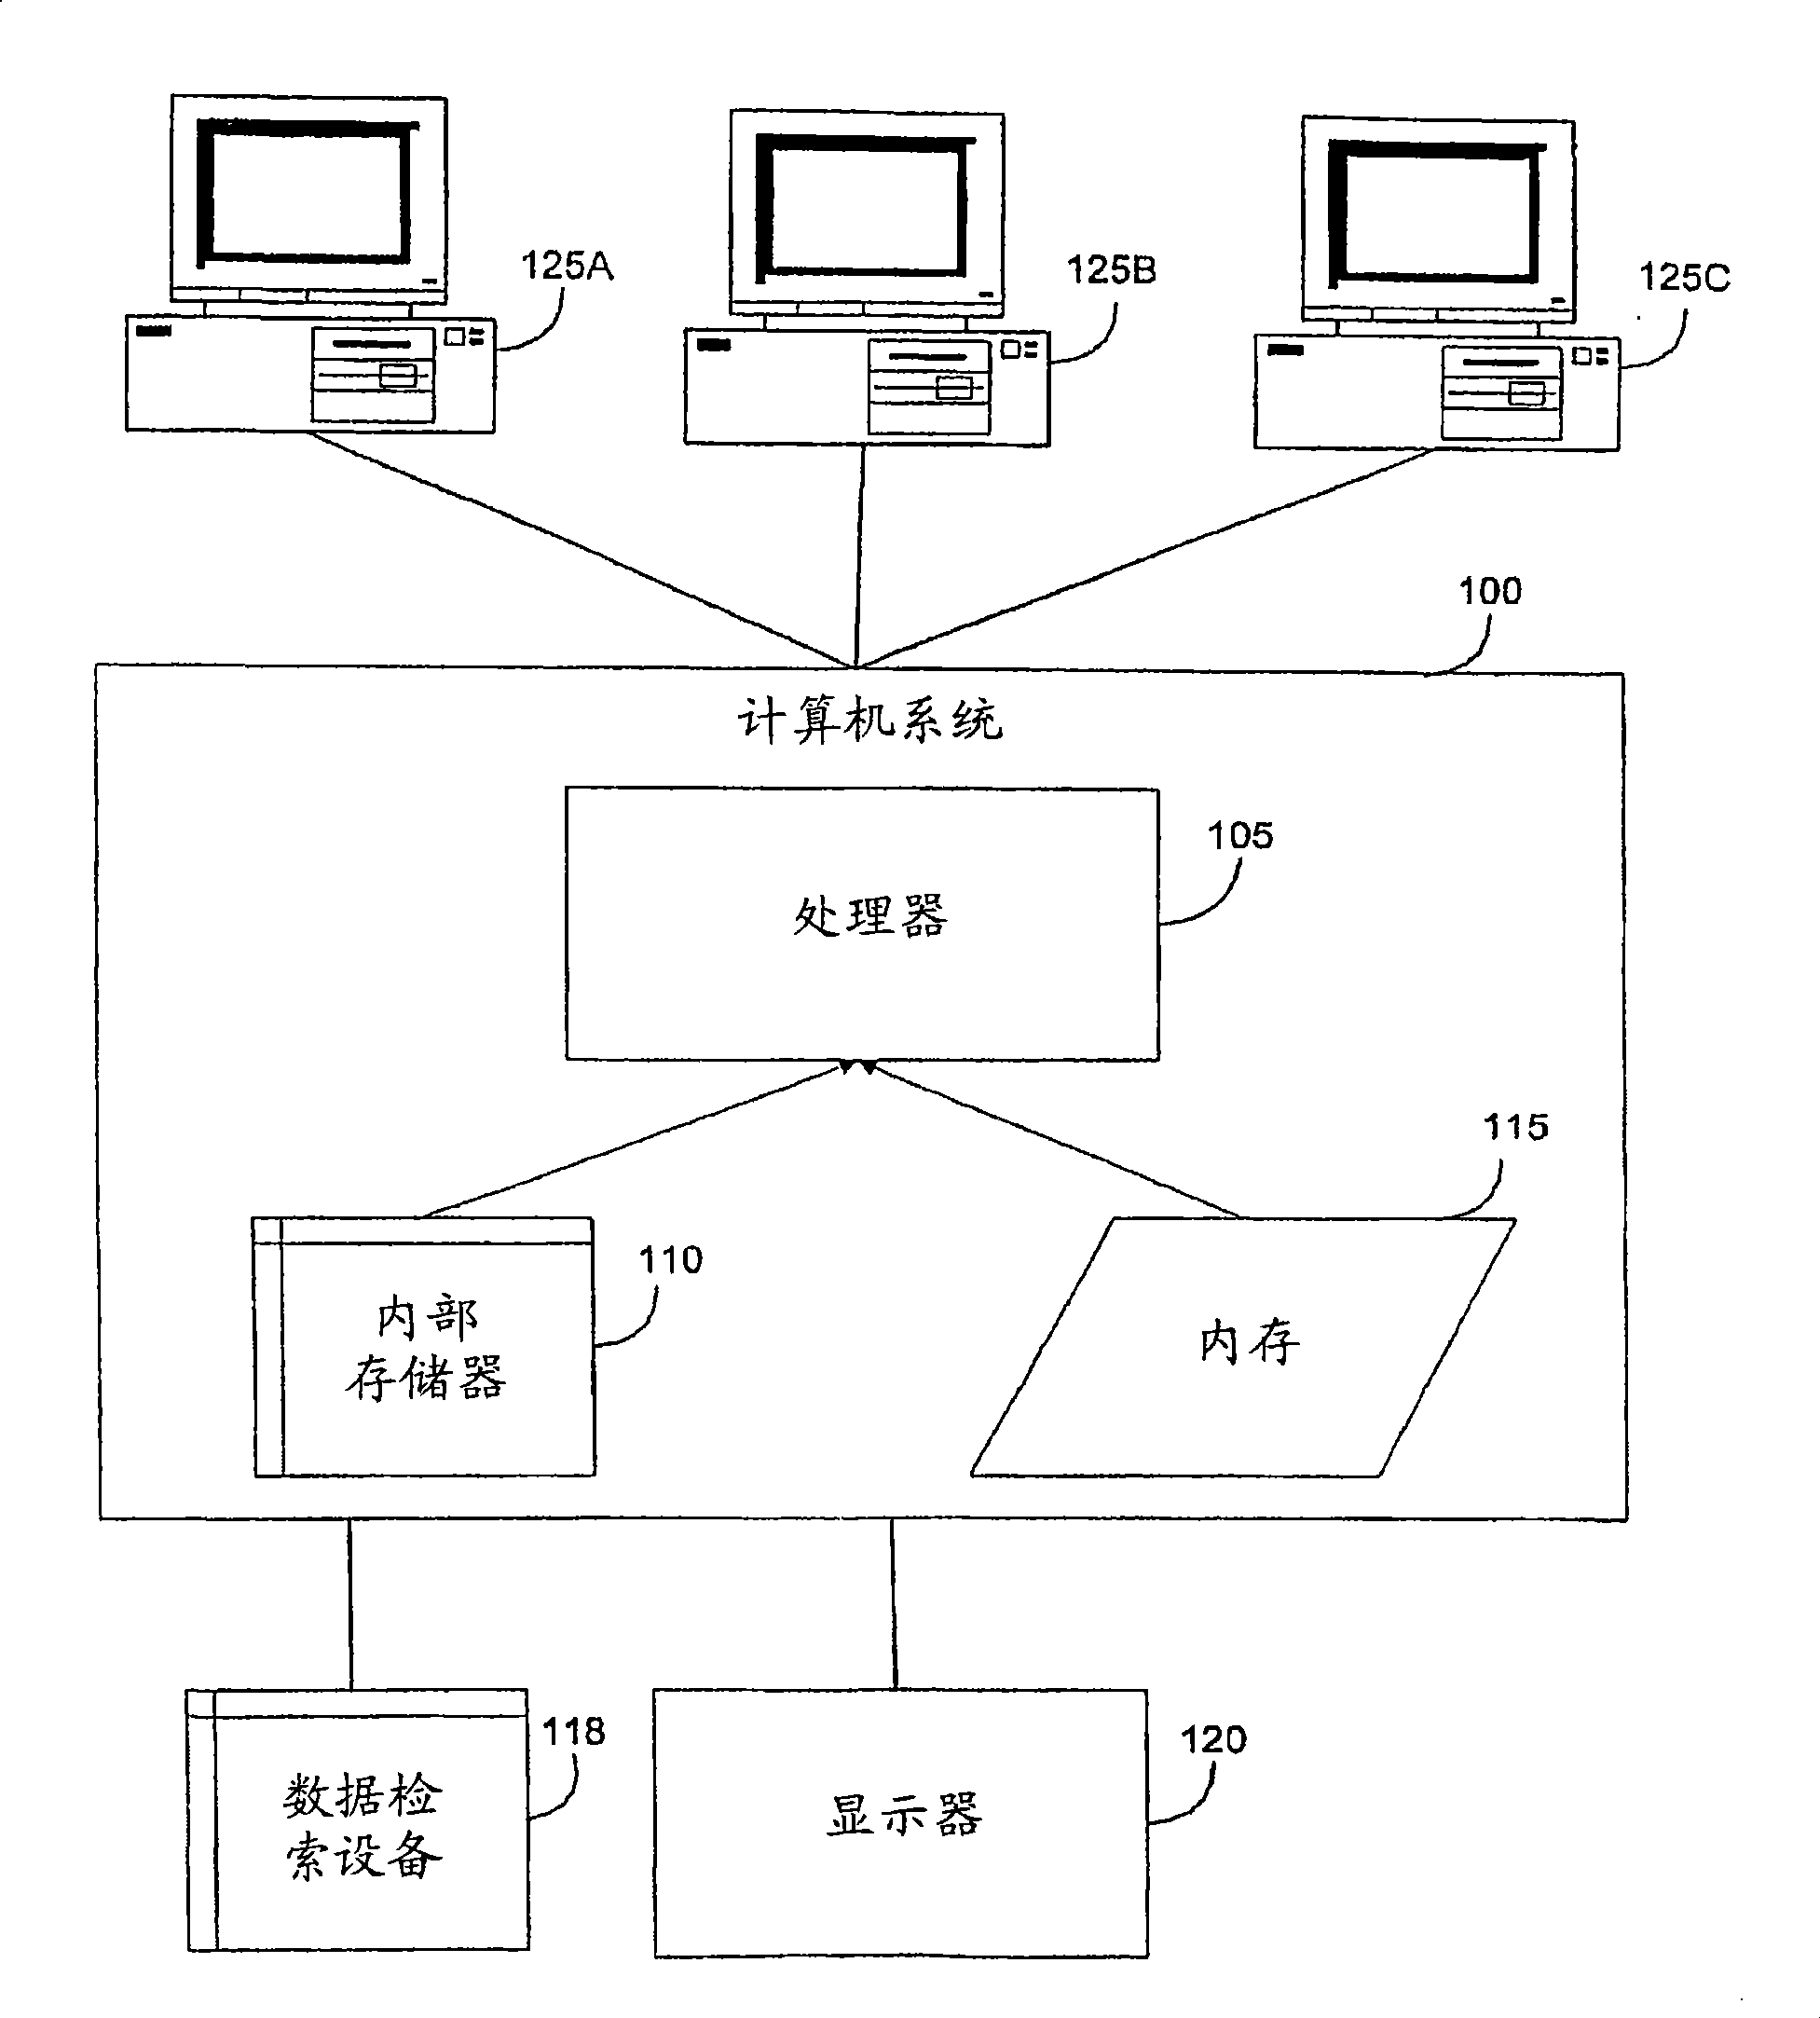 Cellulolytic enzymes, nucleic acids encoding them and methods for making and using them